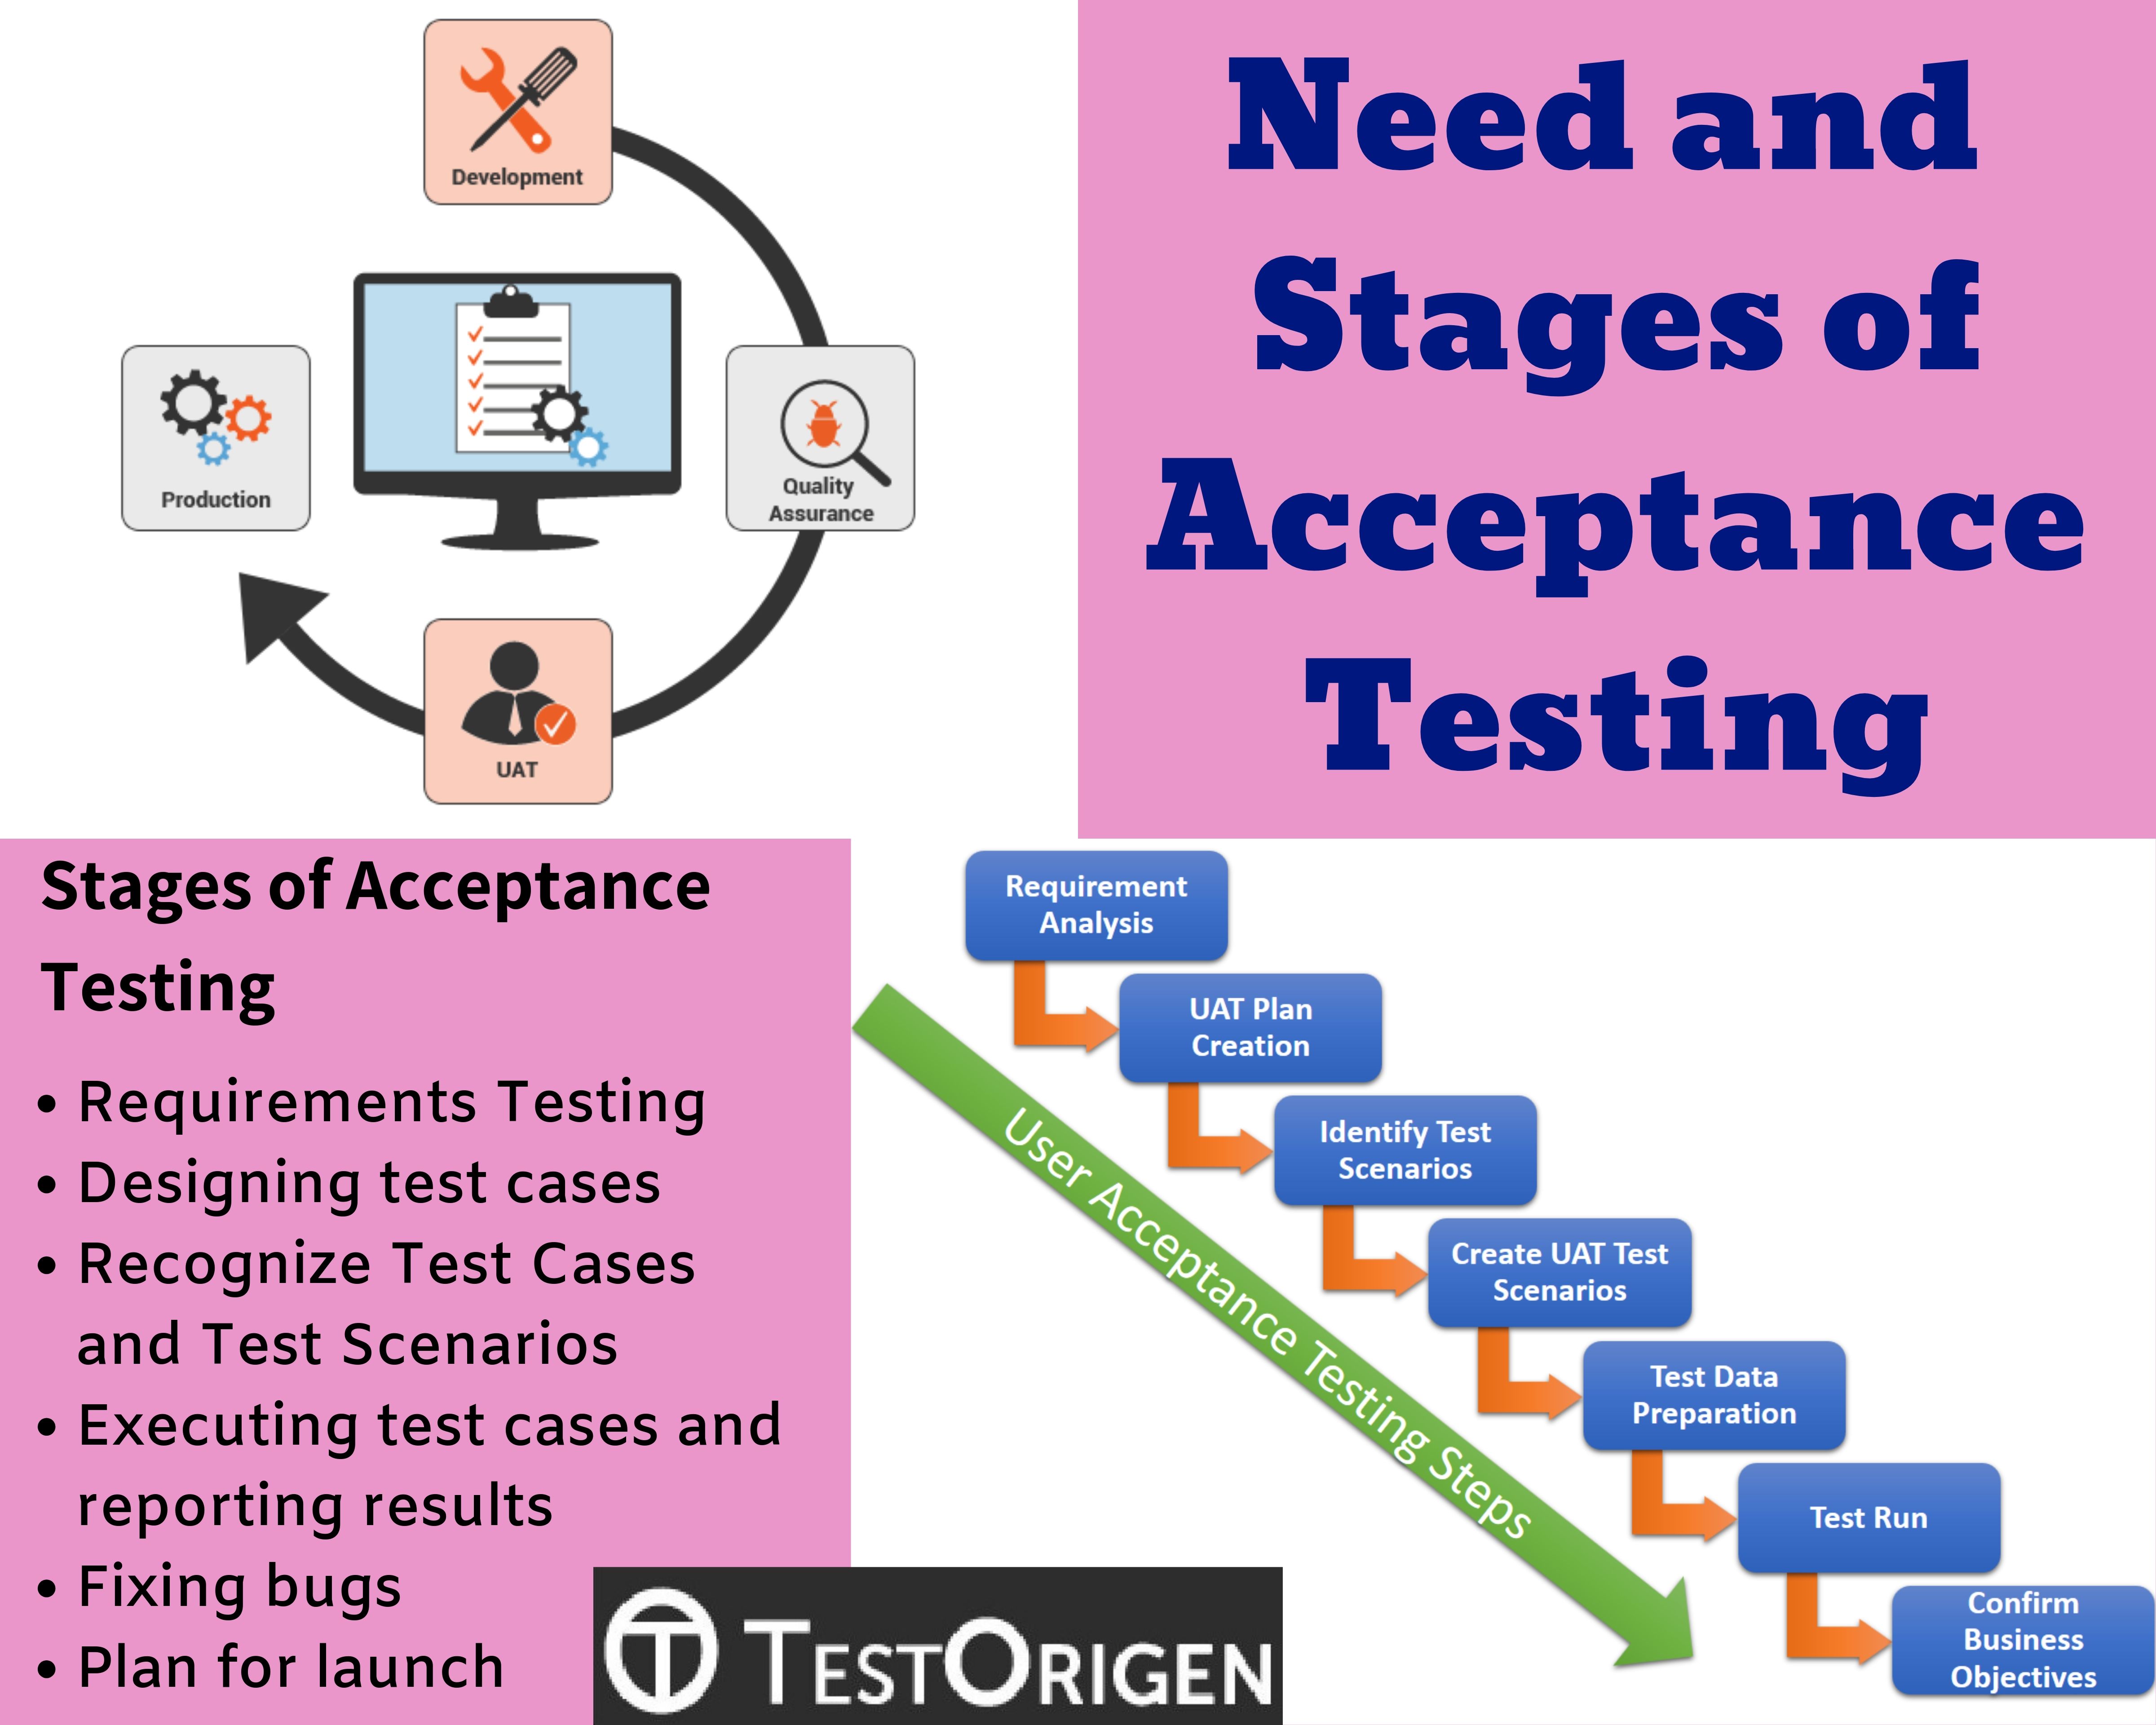 Need and Stages of Acceptance Testing